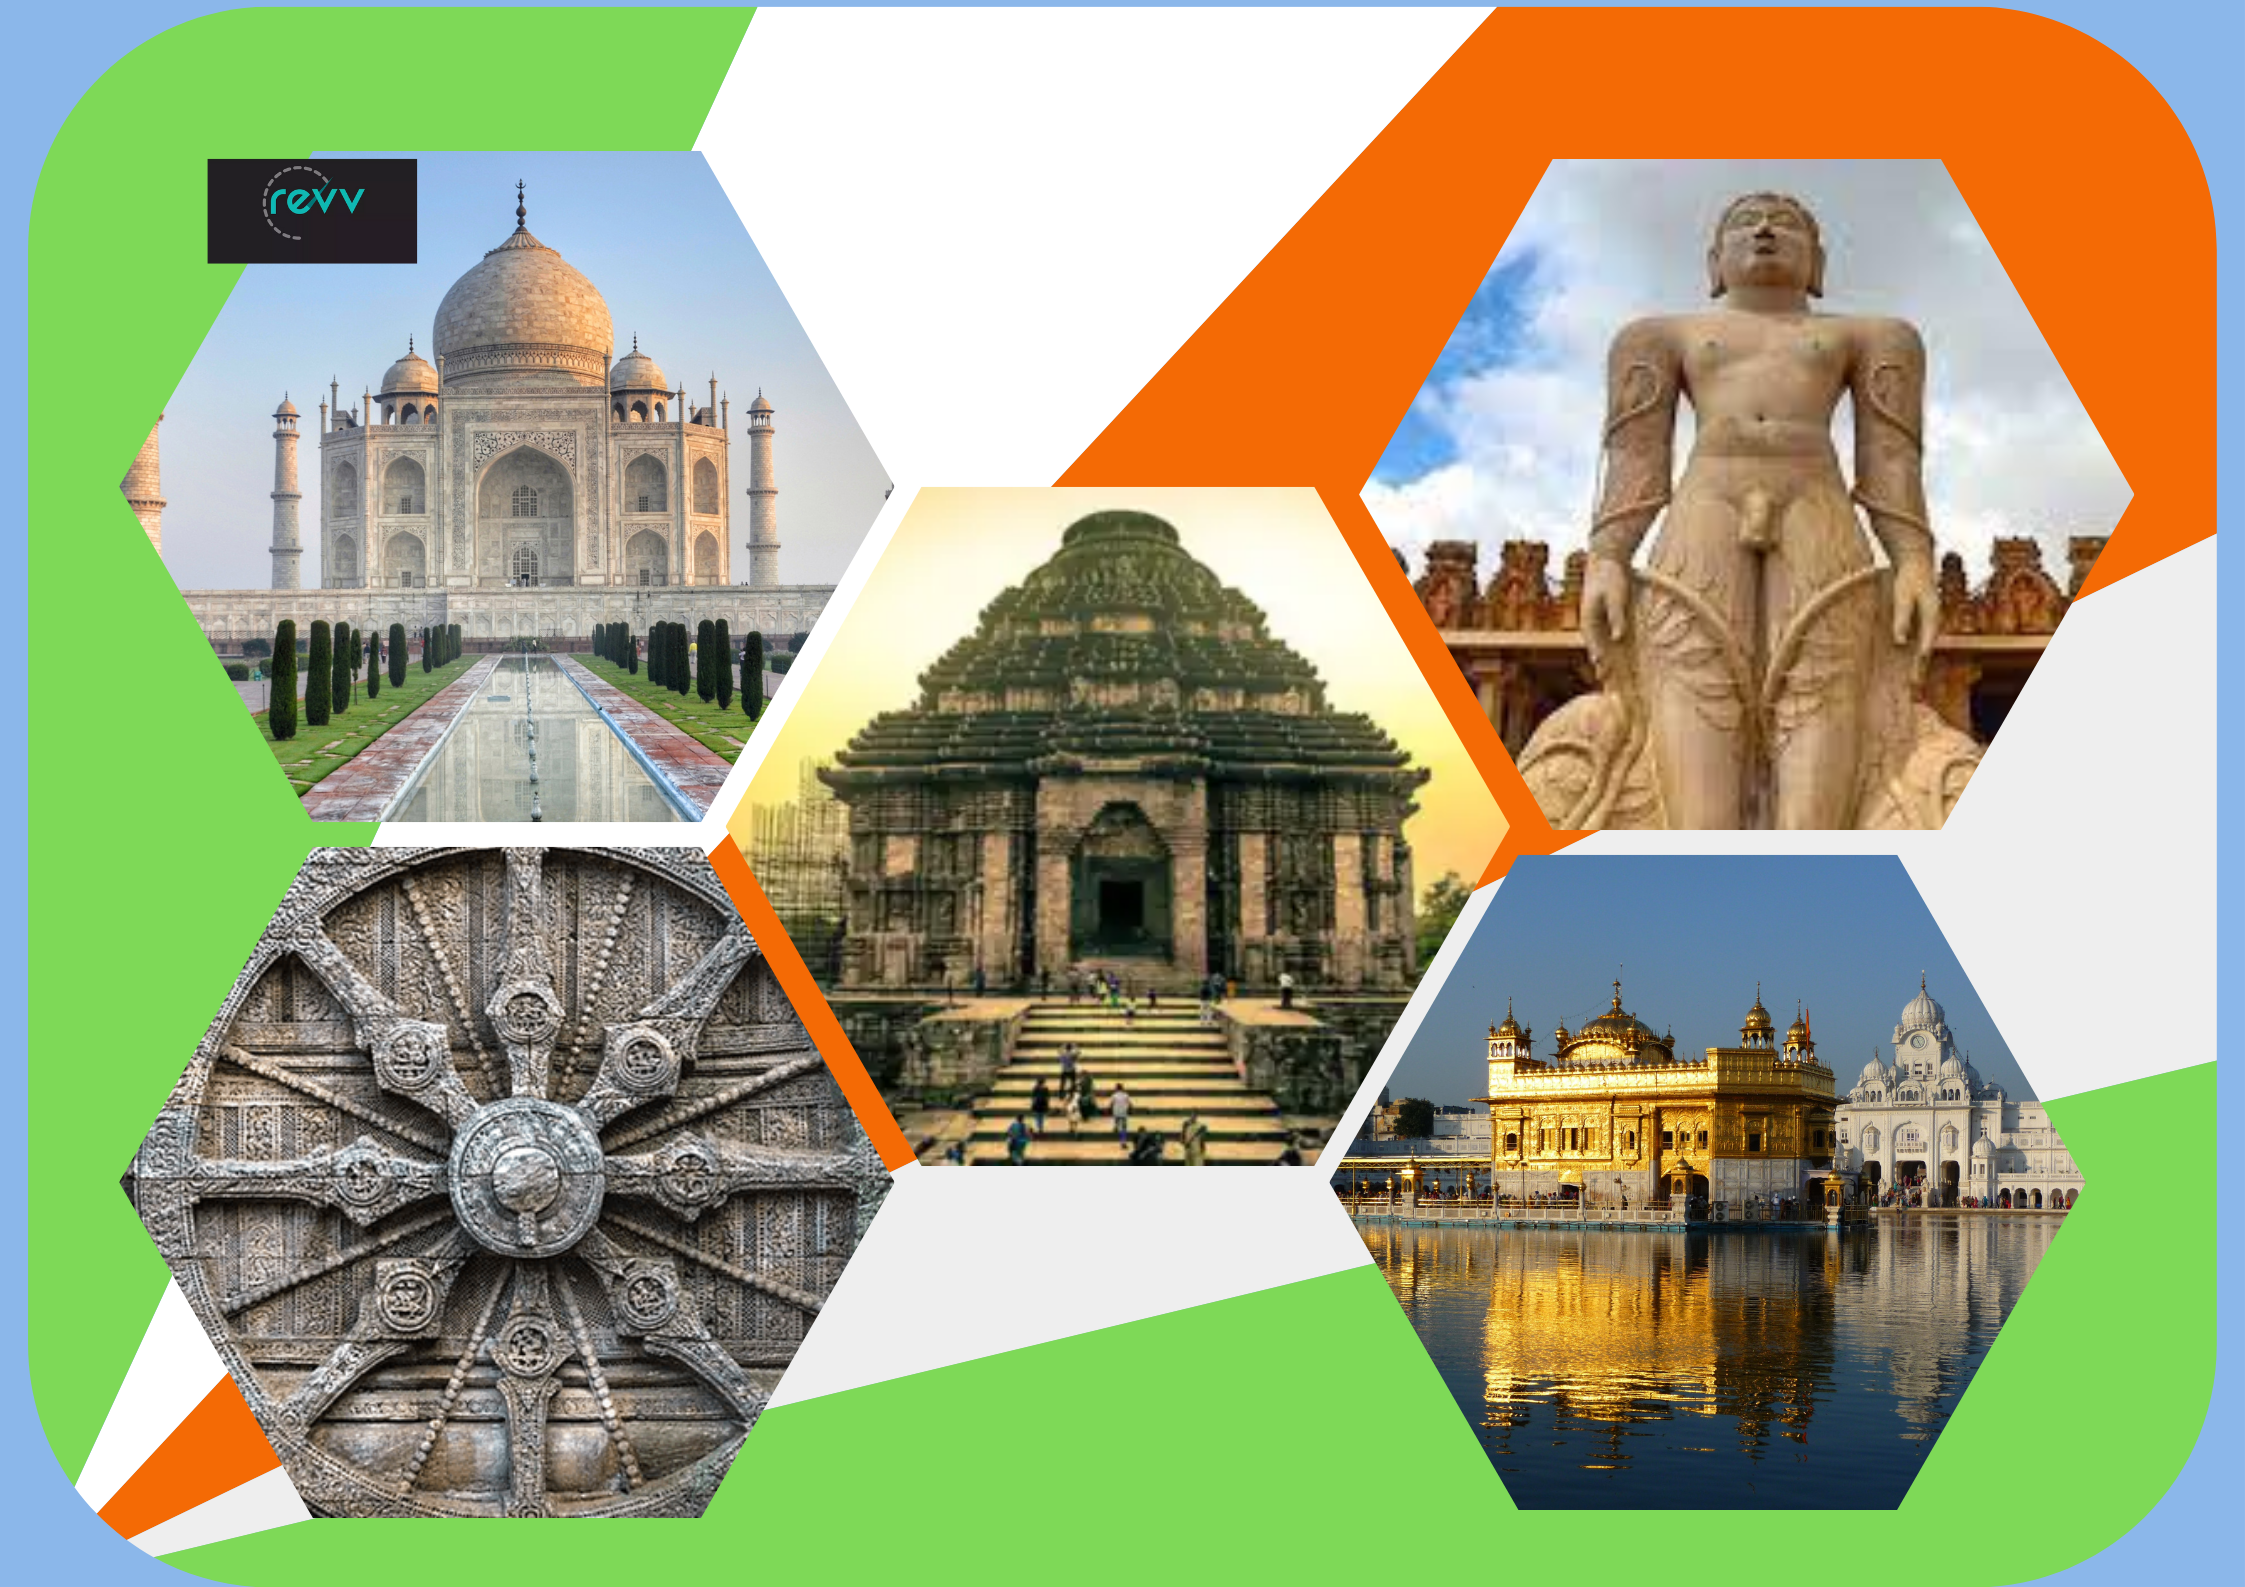 https://www.revv.co.in/blogs/wp-content/uploads/2022/02/Wonders-of-India.png